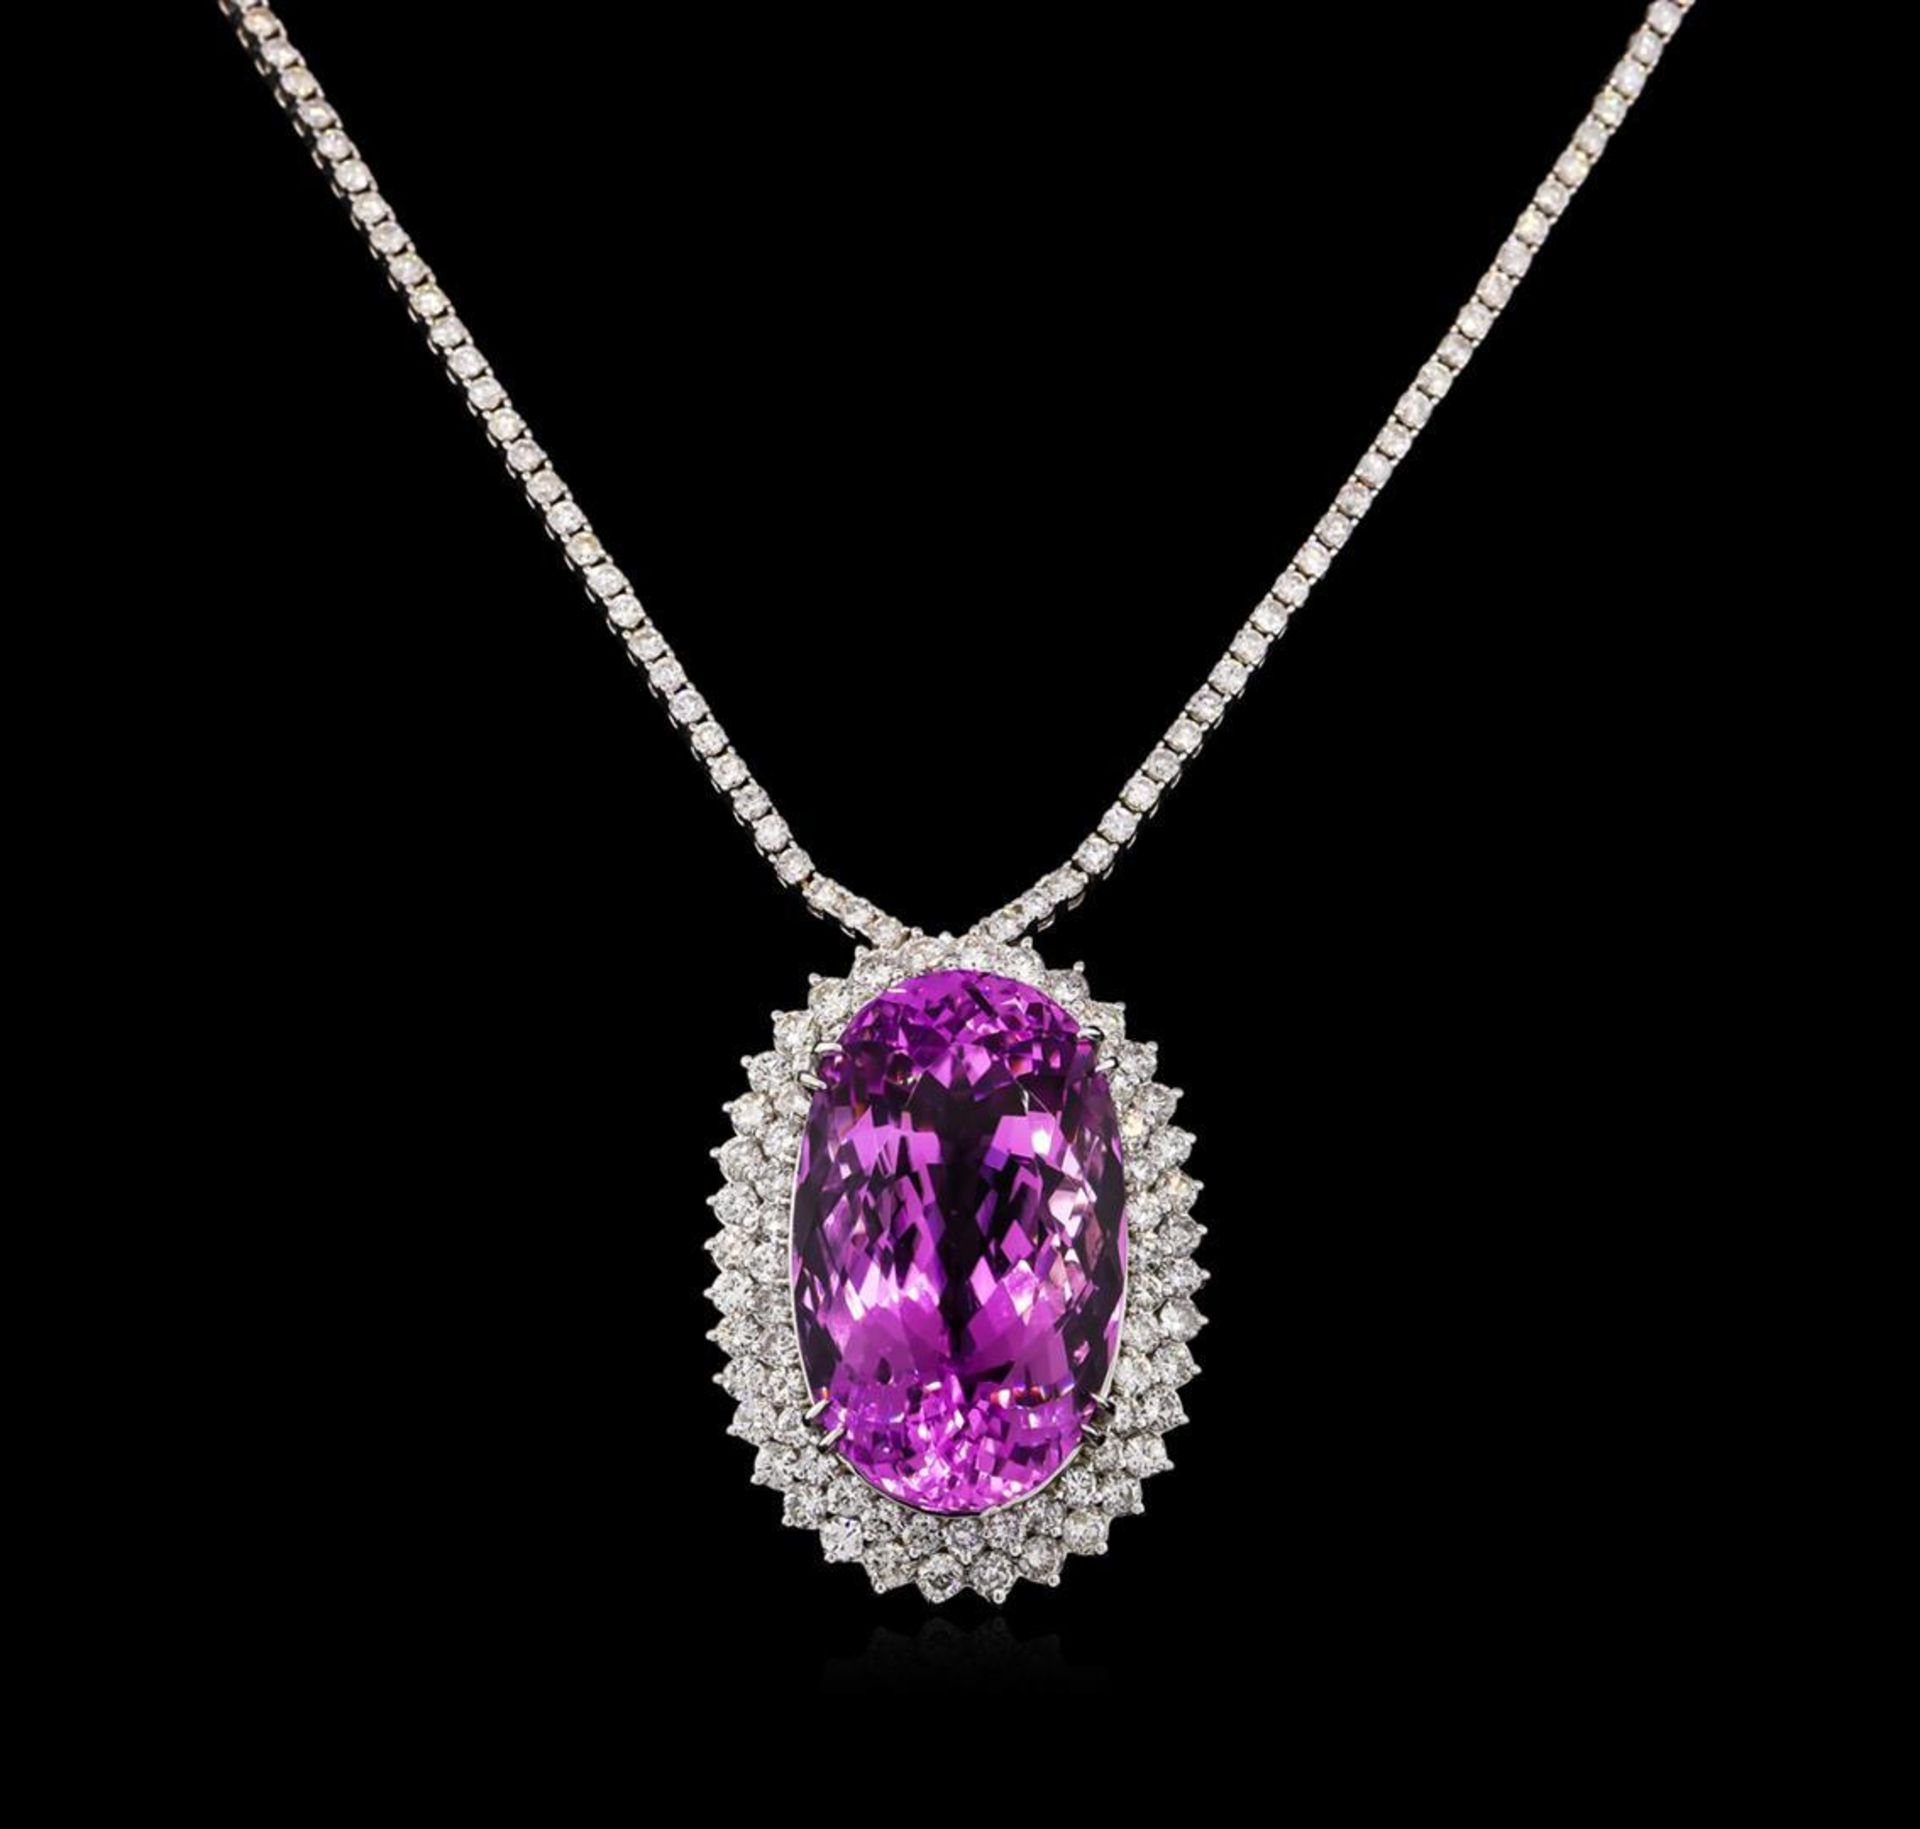 14KT White Gold 71.43 ctw Kunzite and Diamond Necklace - Image 2 of 3